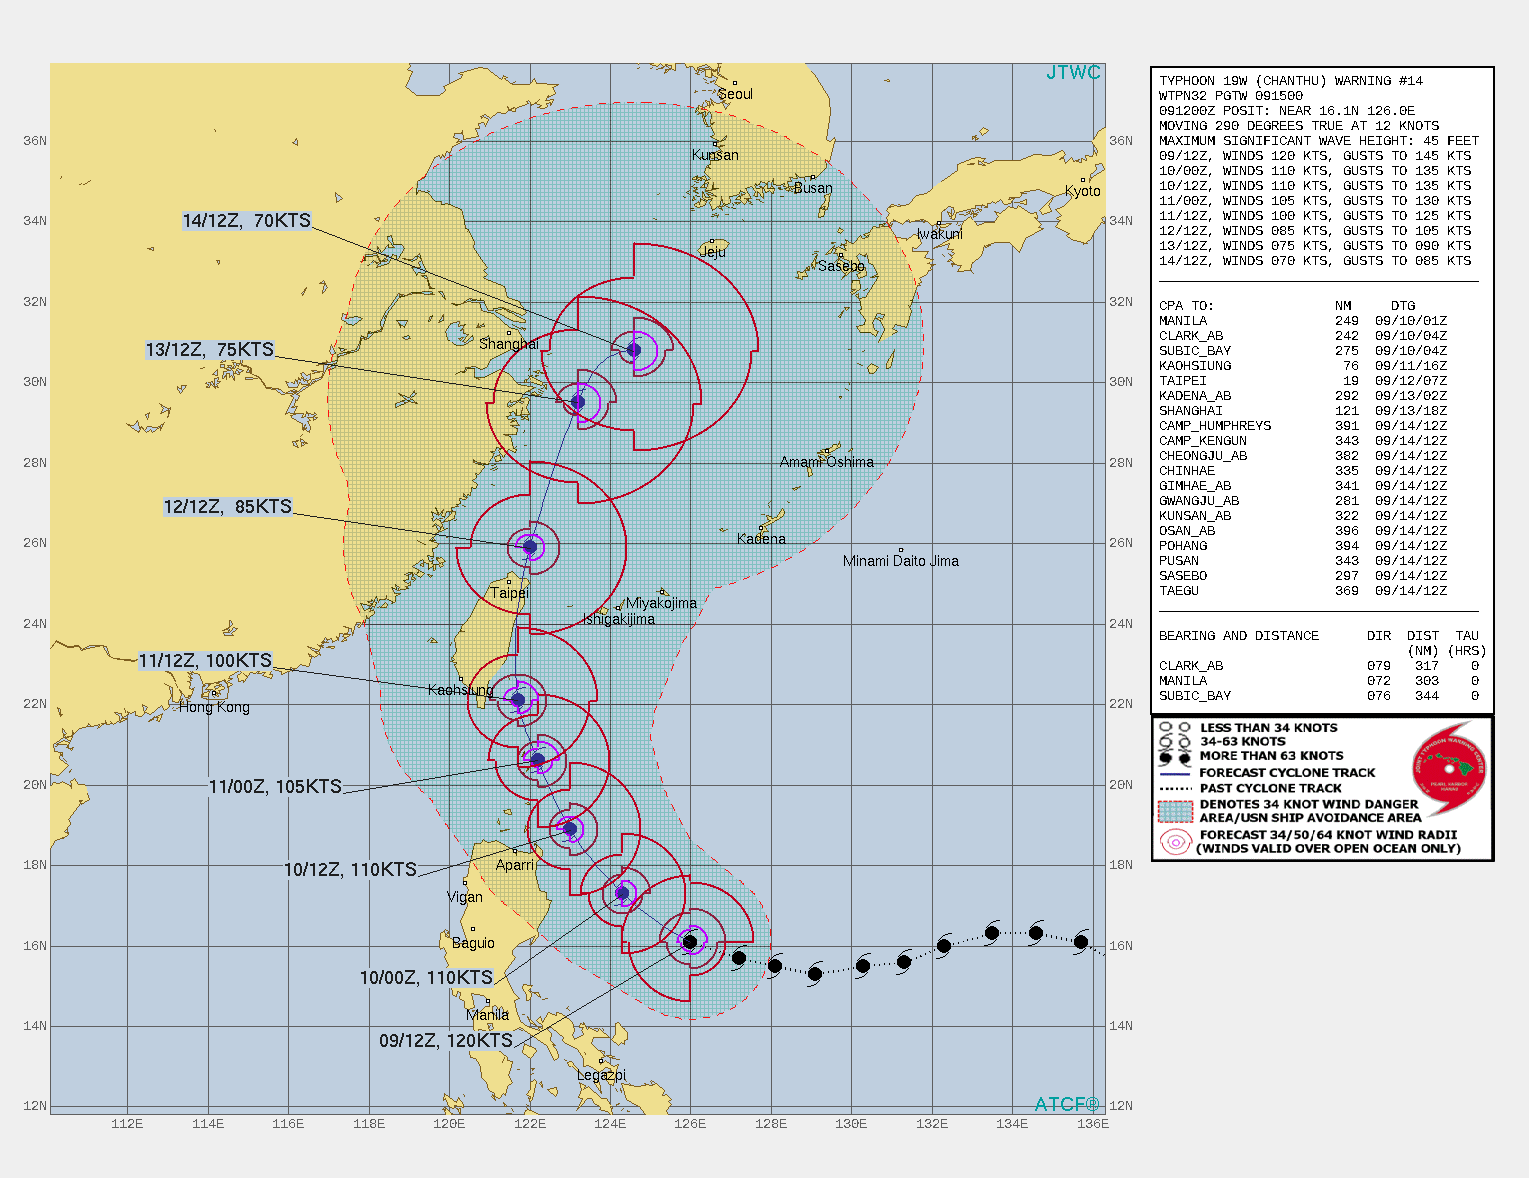 TY 19W(CHANTHU). WARNING 14 ISSUED AT 09/15UTC. SIGNIFICANT FORECAST CHANGES: THERE ARE NO SIGNIFICANT CHANGES TO THE FORECAST FROM THE PREVIOUS WARNING.  FORECAST DISCUSSION: TYPHOON (TY) 19W IS BEGINNING A MORE NORTHWESTWARD TRACK AS IT BEGINS TO ROUND THE WESTERN EDGE OF THE SUBTROPICAL RIDGE. AFTER 48H, THE SYSTEM WILL CROSS TAIWAN AS IT TRACKS NORTHWARD AND EVENTUALLY CRESTS THE SUBTROPICAL RIDGE AXIS. AFTER 96H, THE SYSTEM WILL TURN NORTH-NORTHEASTWARD ON THE POLEWARD SIDE OF THE SUBTROPICAL RIDGE. TY 19W WILL REMAIN IN A FAVORABLE ENVIRONMENT FOR THE EARLY PART OF THE FORECAST, SUSTAINING IT ABOVE 100 KNOTS/CAT 3 UNTIL ABOUT 48H, AT WHICH POINT LAND INTERACTION WITH TAIWAN WILL BEGIN TO WEAKEN IT. THE SYSTEM WILL  WEAKEN TO 85 KNOTS/CAT 2 AS IT EXITS INTO THE TAIWAN STRAIT AROUND 72H. AFTERWARDS, INCREASING VERTICAL WIND SHEAR AND DECREASING SEA SURFACE TEMPERATURES WILL FURTHER WEAKEN THE SYSTEM TO 70 KNOTS/CAT 1 BY 120H.